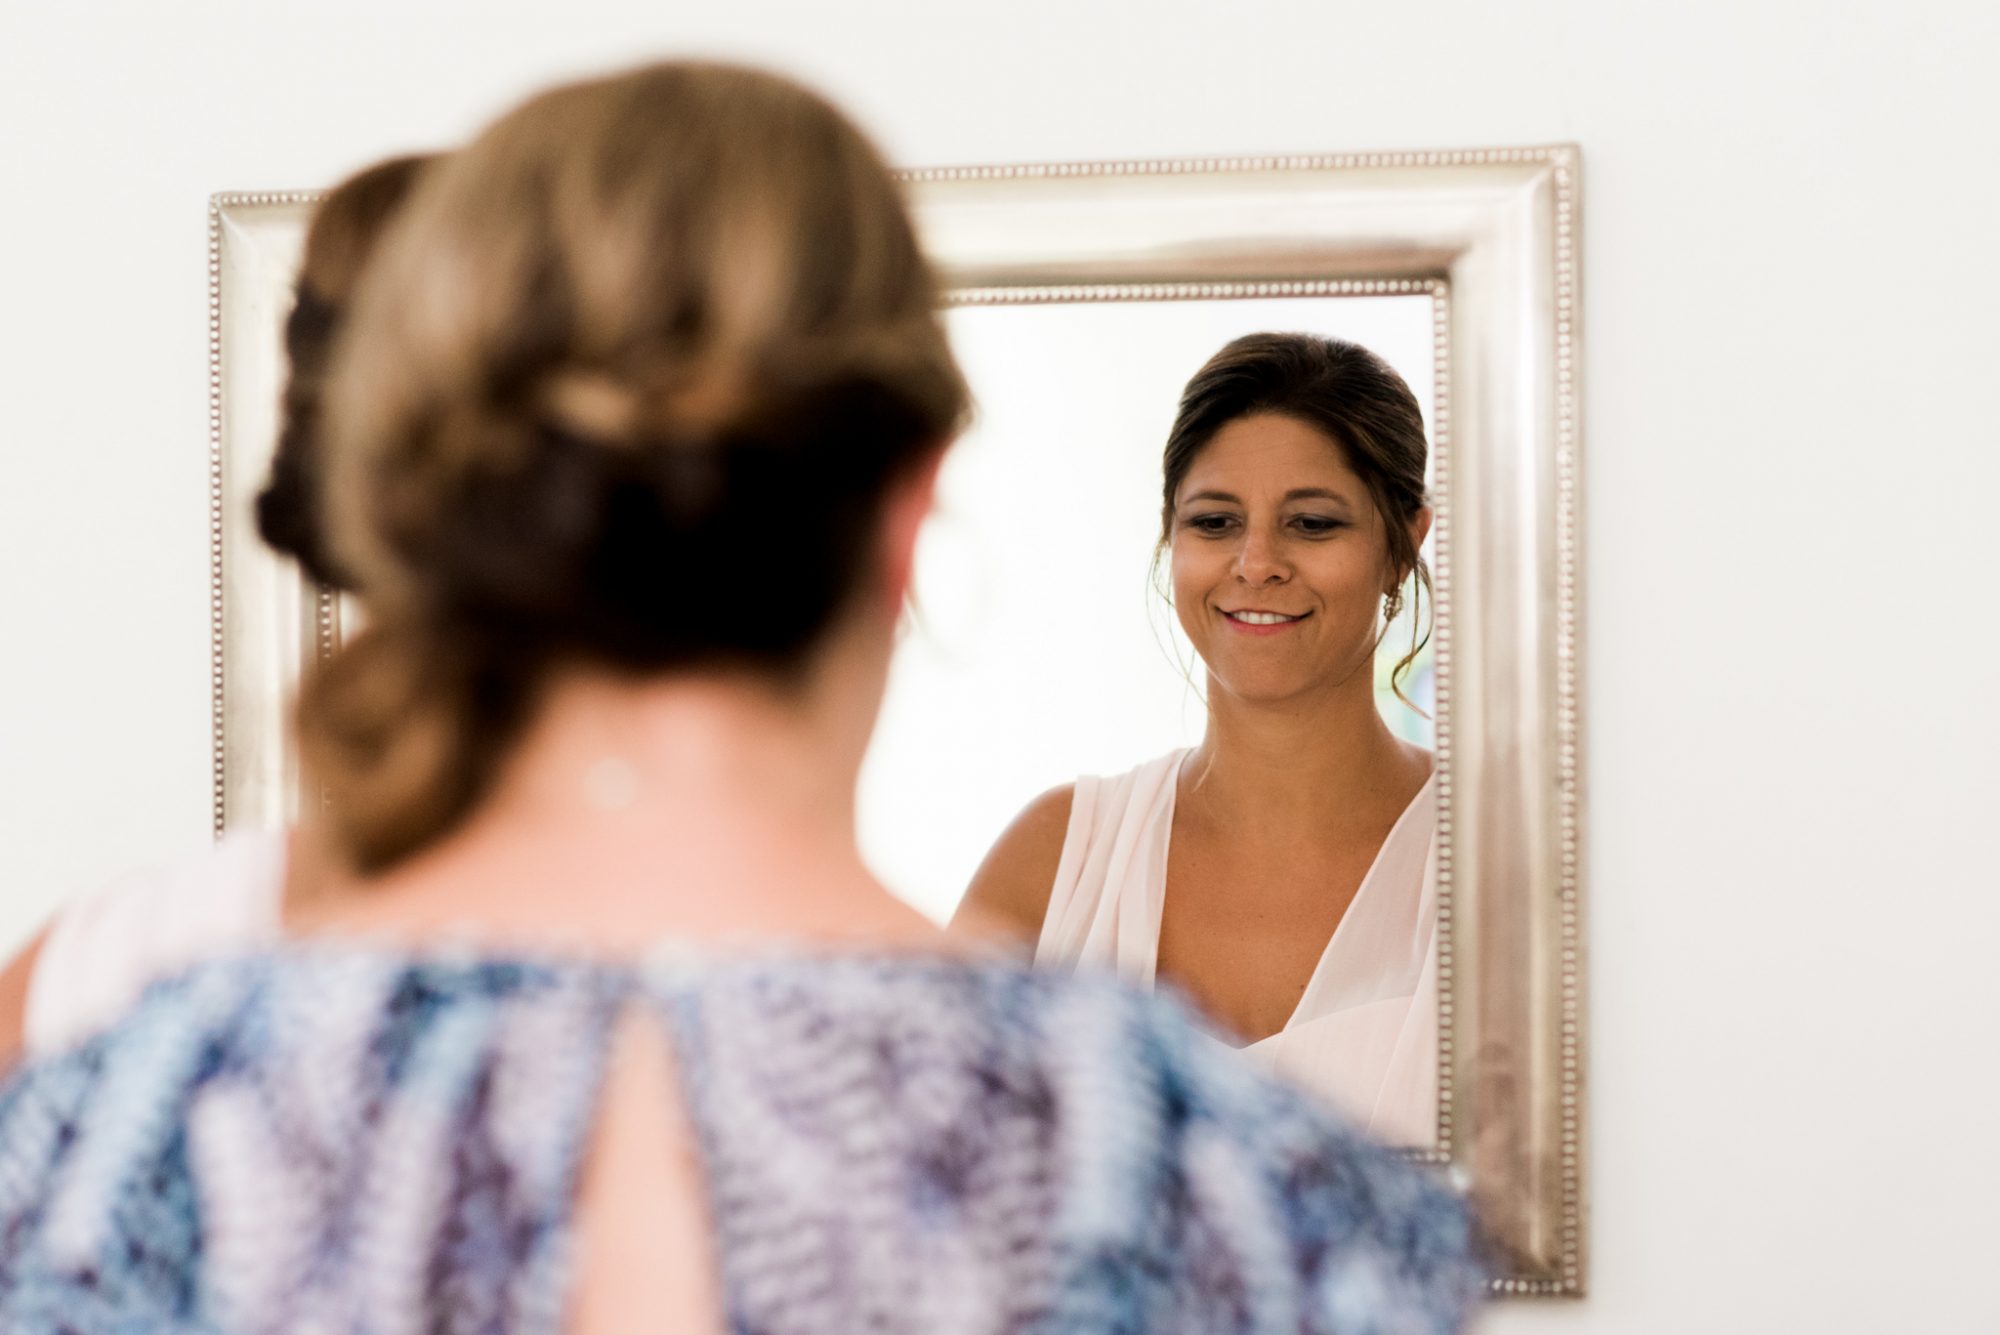 A Key West bride admiring herself in the mirror.